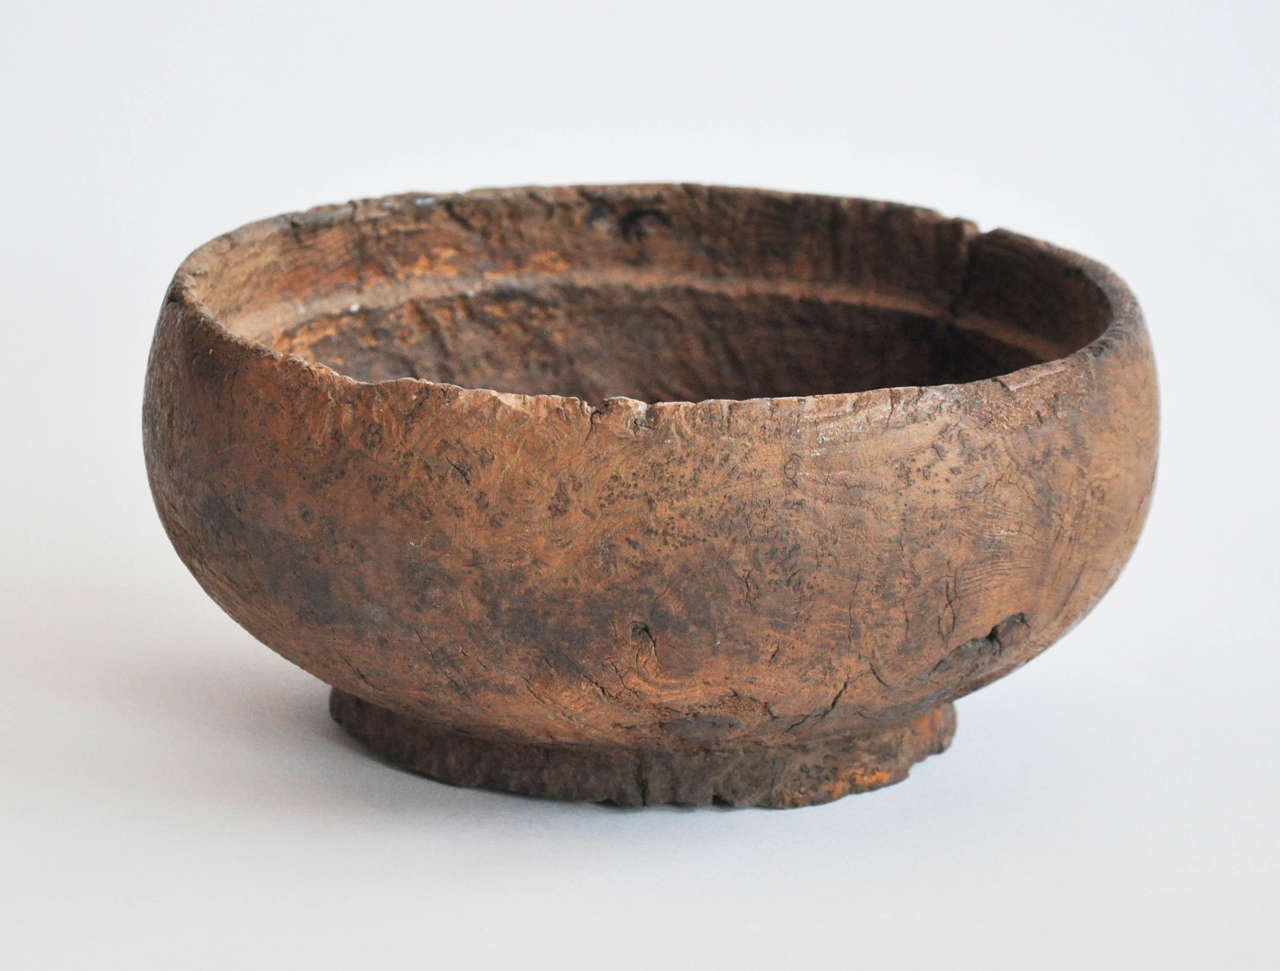 Early 19th Century Wooden Bowl From Nagaland
These beautiful primitive bowls were used in kitchens for various food oriented activities including storing and cooking. 
This example shows typical subtle carvings which verify its origin
Details have